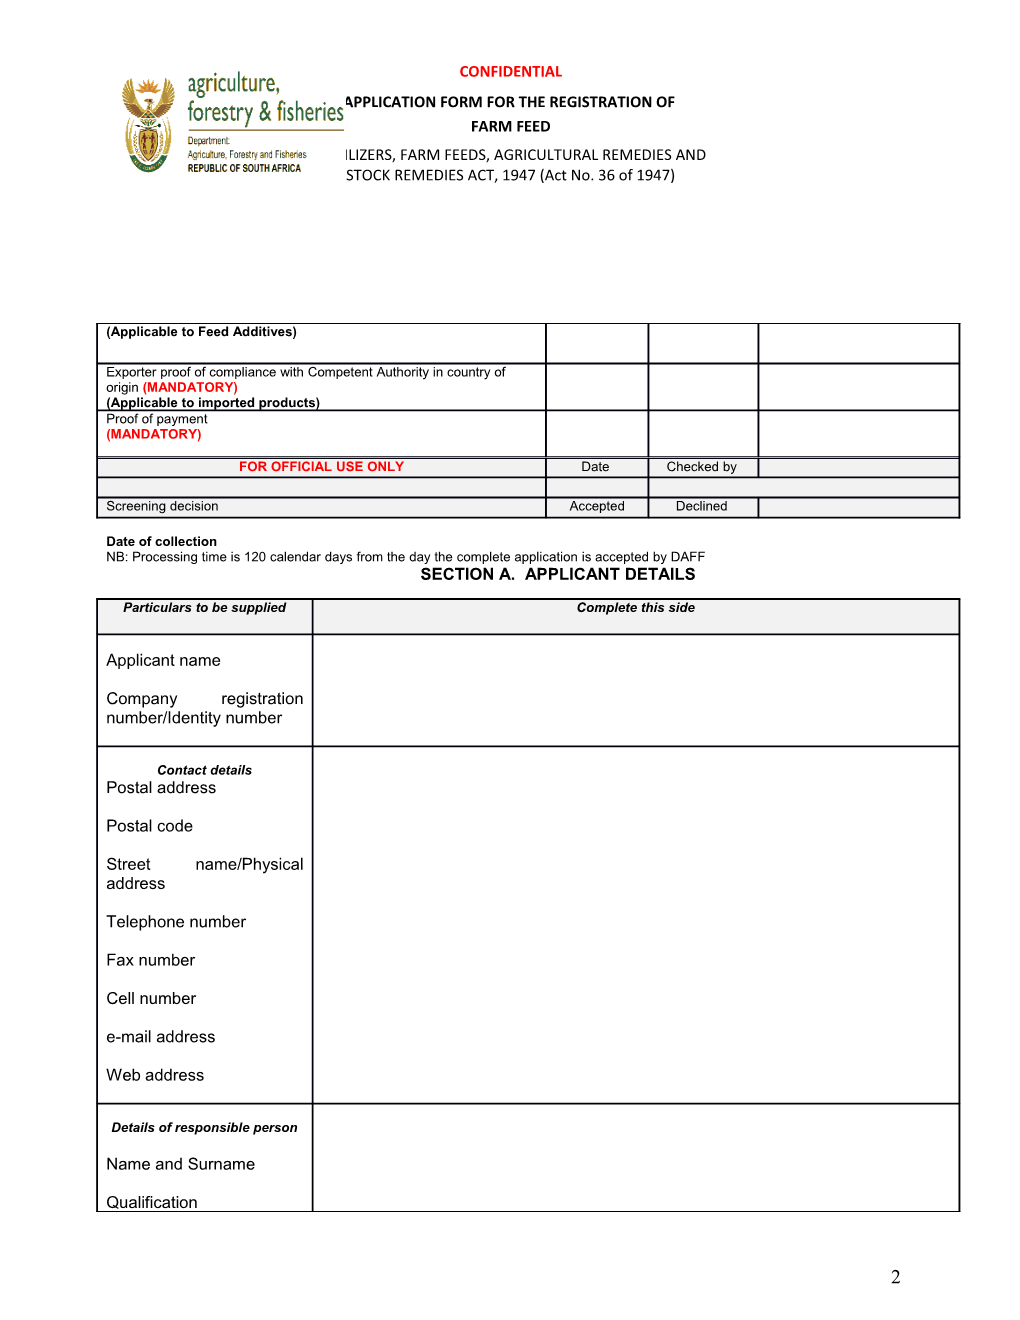 Check List for Application Form